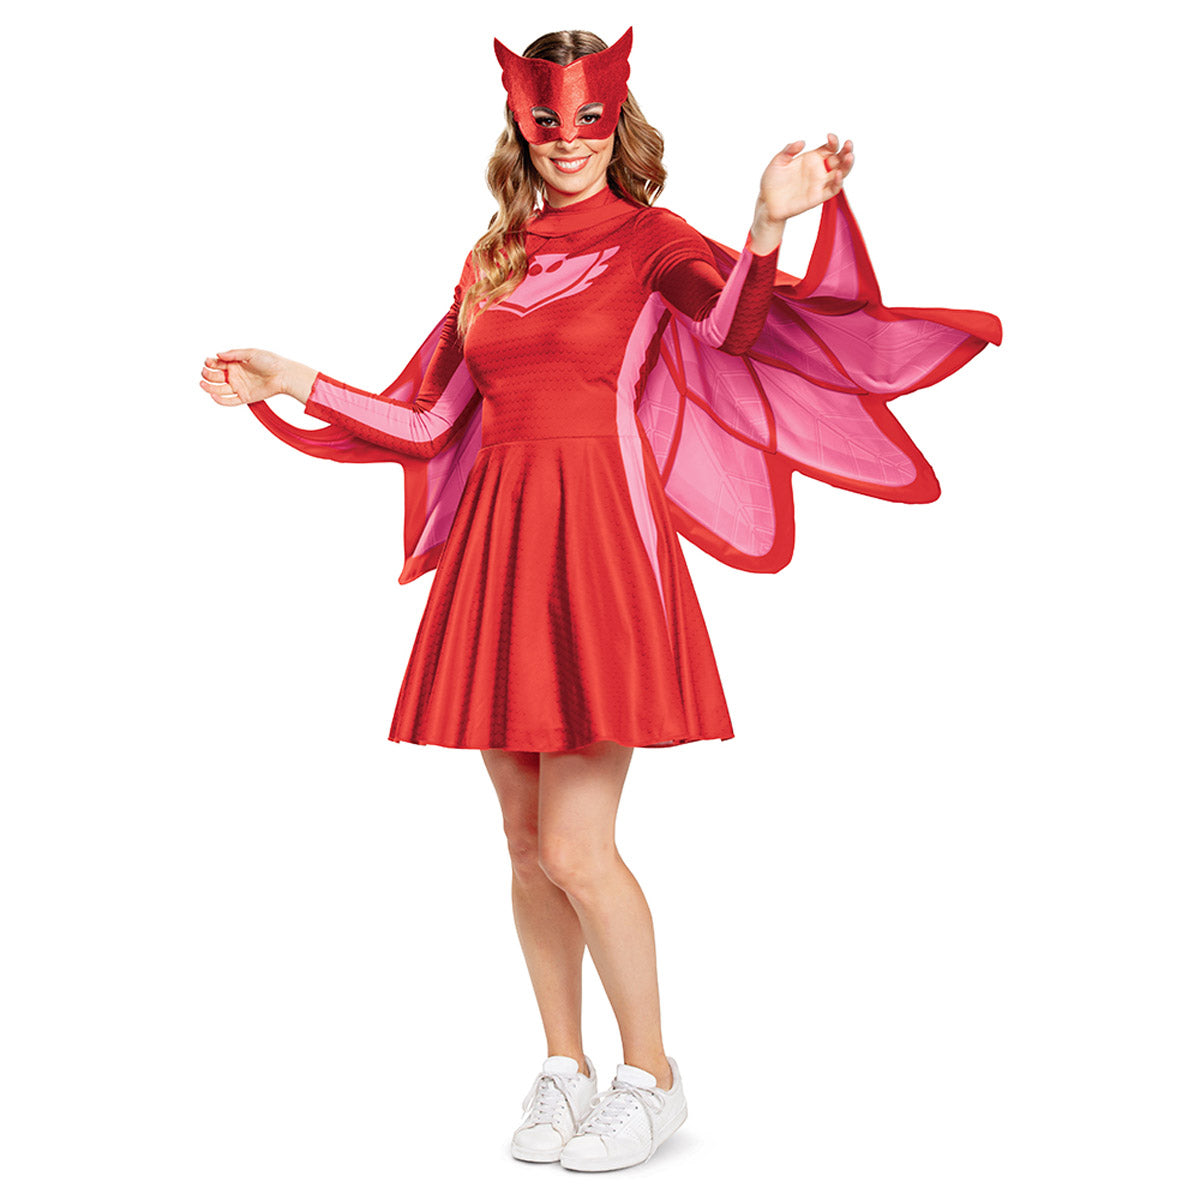 OWLETTE CLASSIC ADULT Disguise 15212